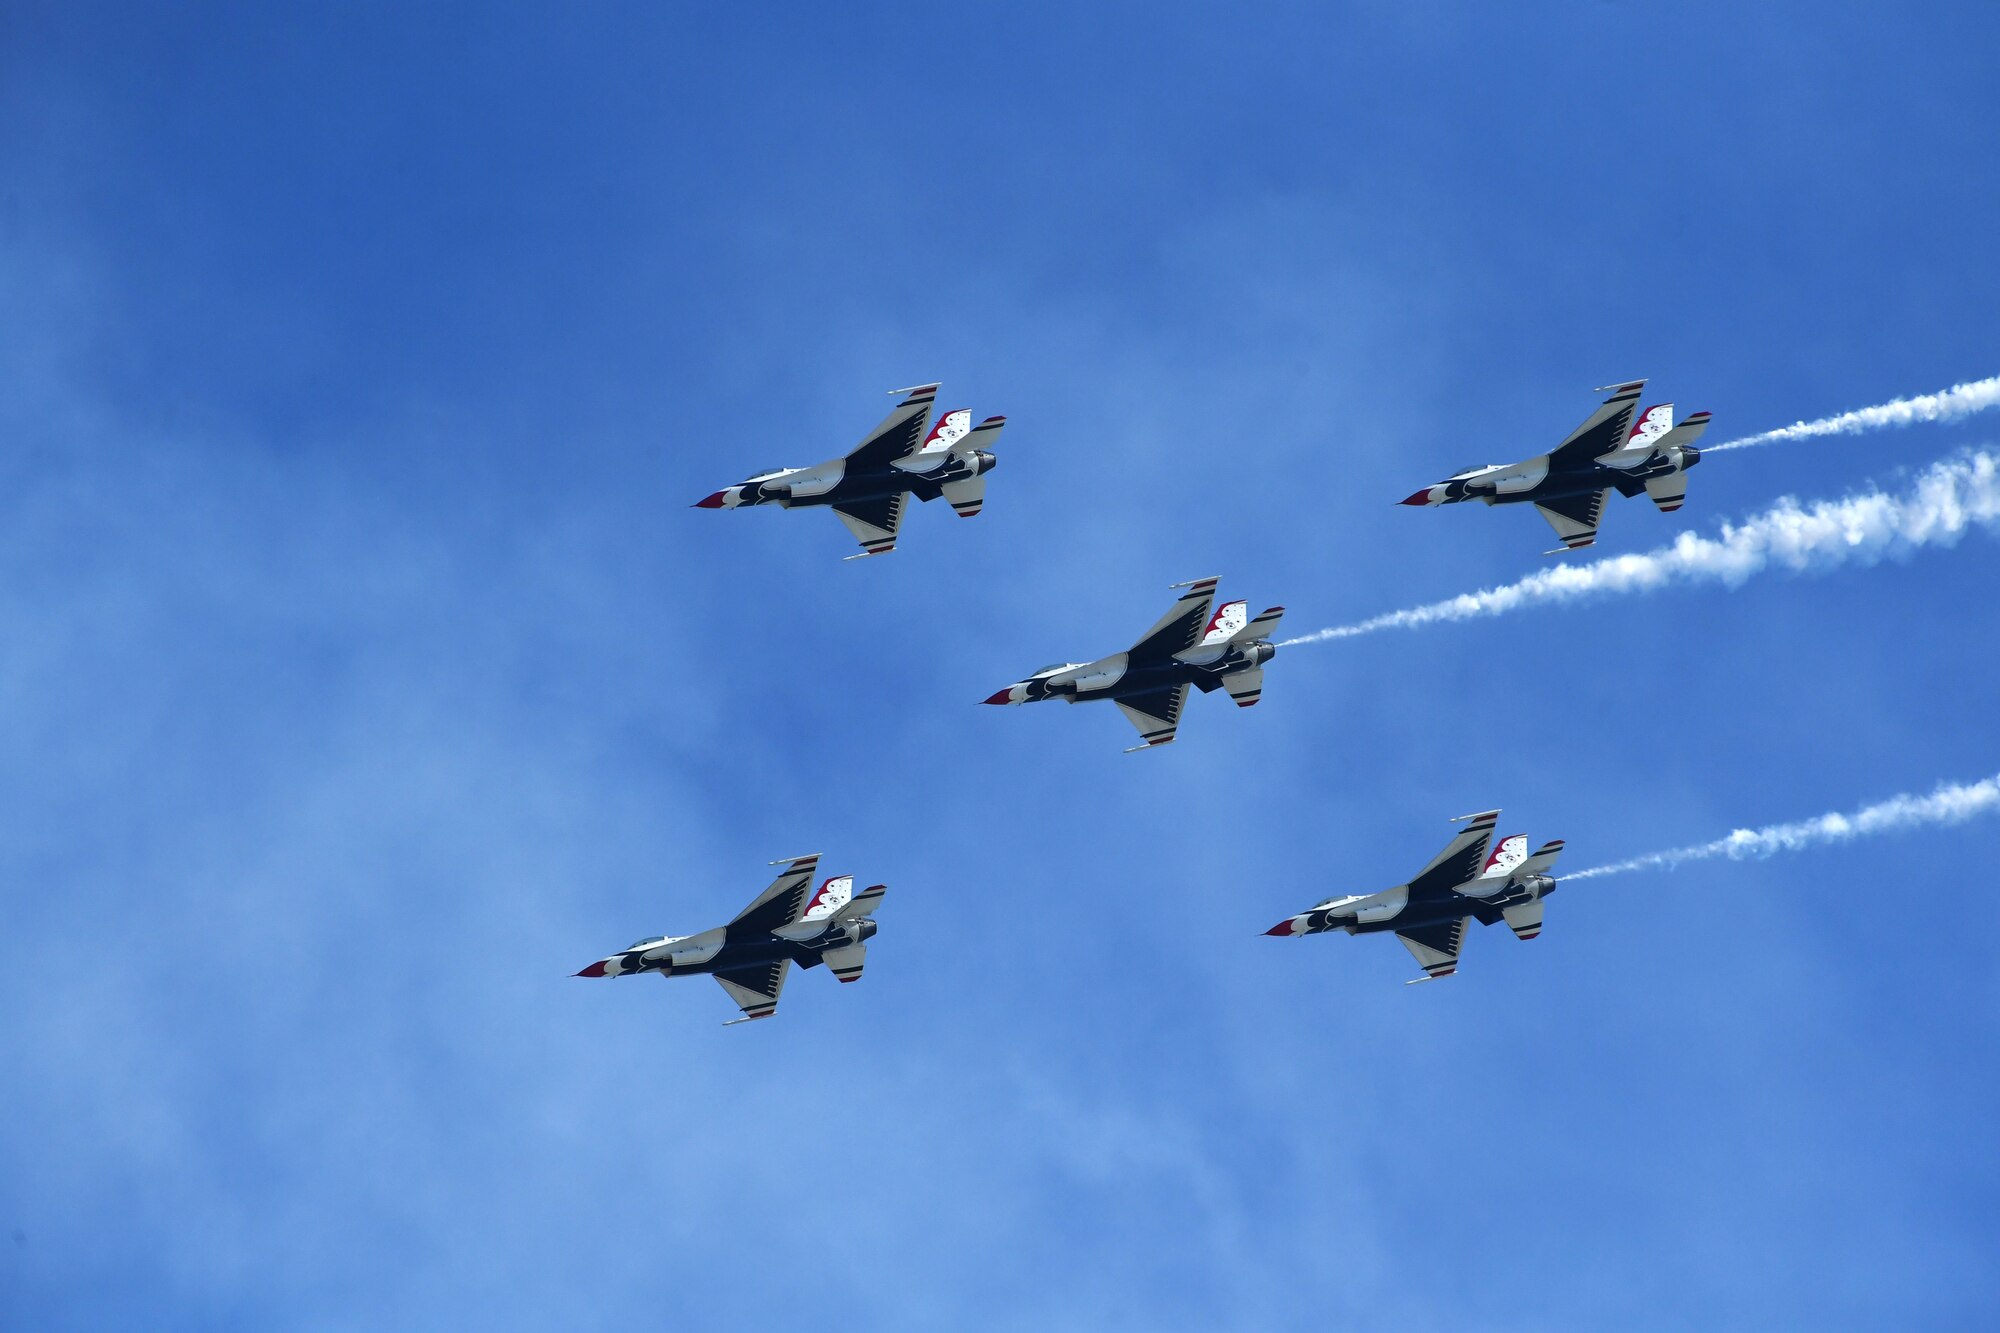 The U.S. Air Force Thunderbirds perform at the 2017 Wings over Solano air show May 7, 2017, at Travis Air Force Base, Calif. The Thunderbirds concluded each show and were one of many aerial demonstrations held at the event May 6-7. (U.S. Air Force photo/Airman 1st Class James Thompson)